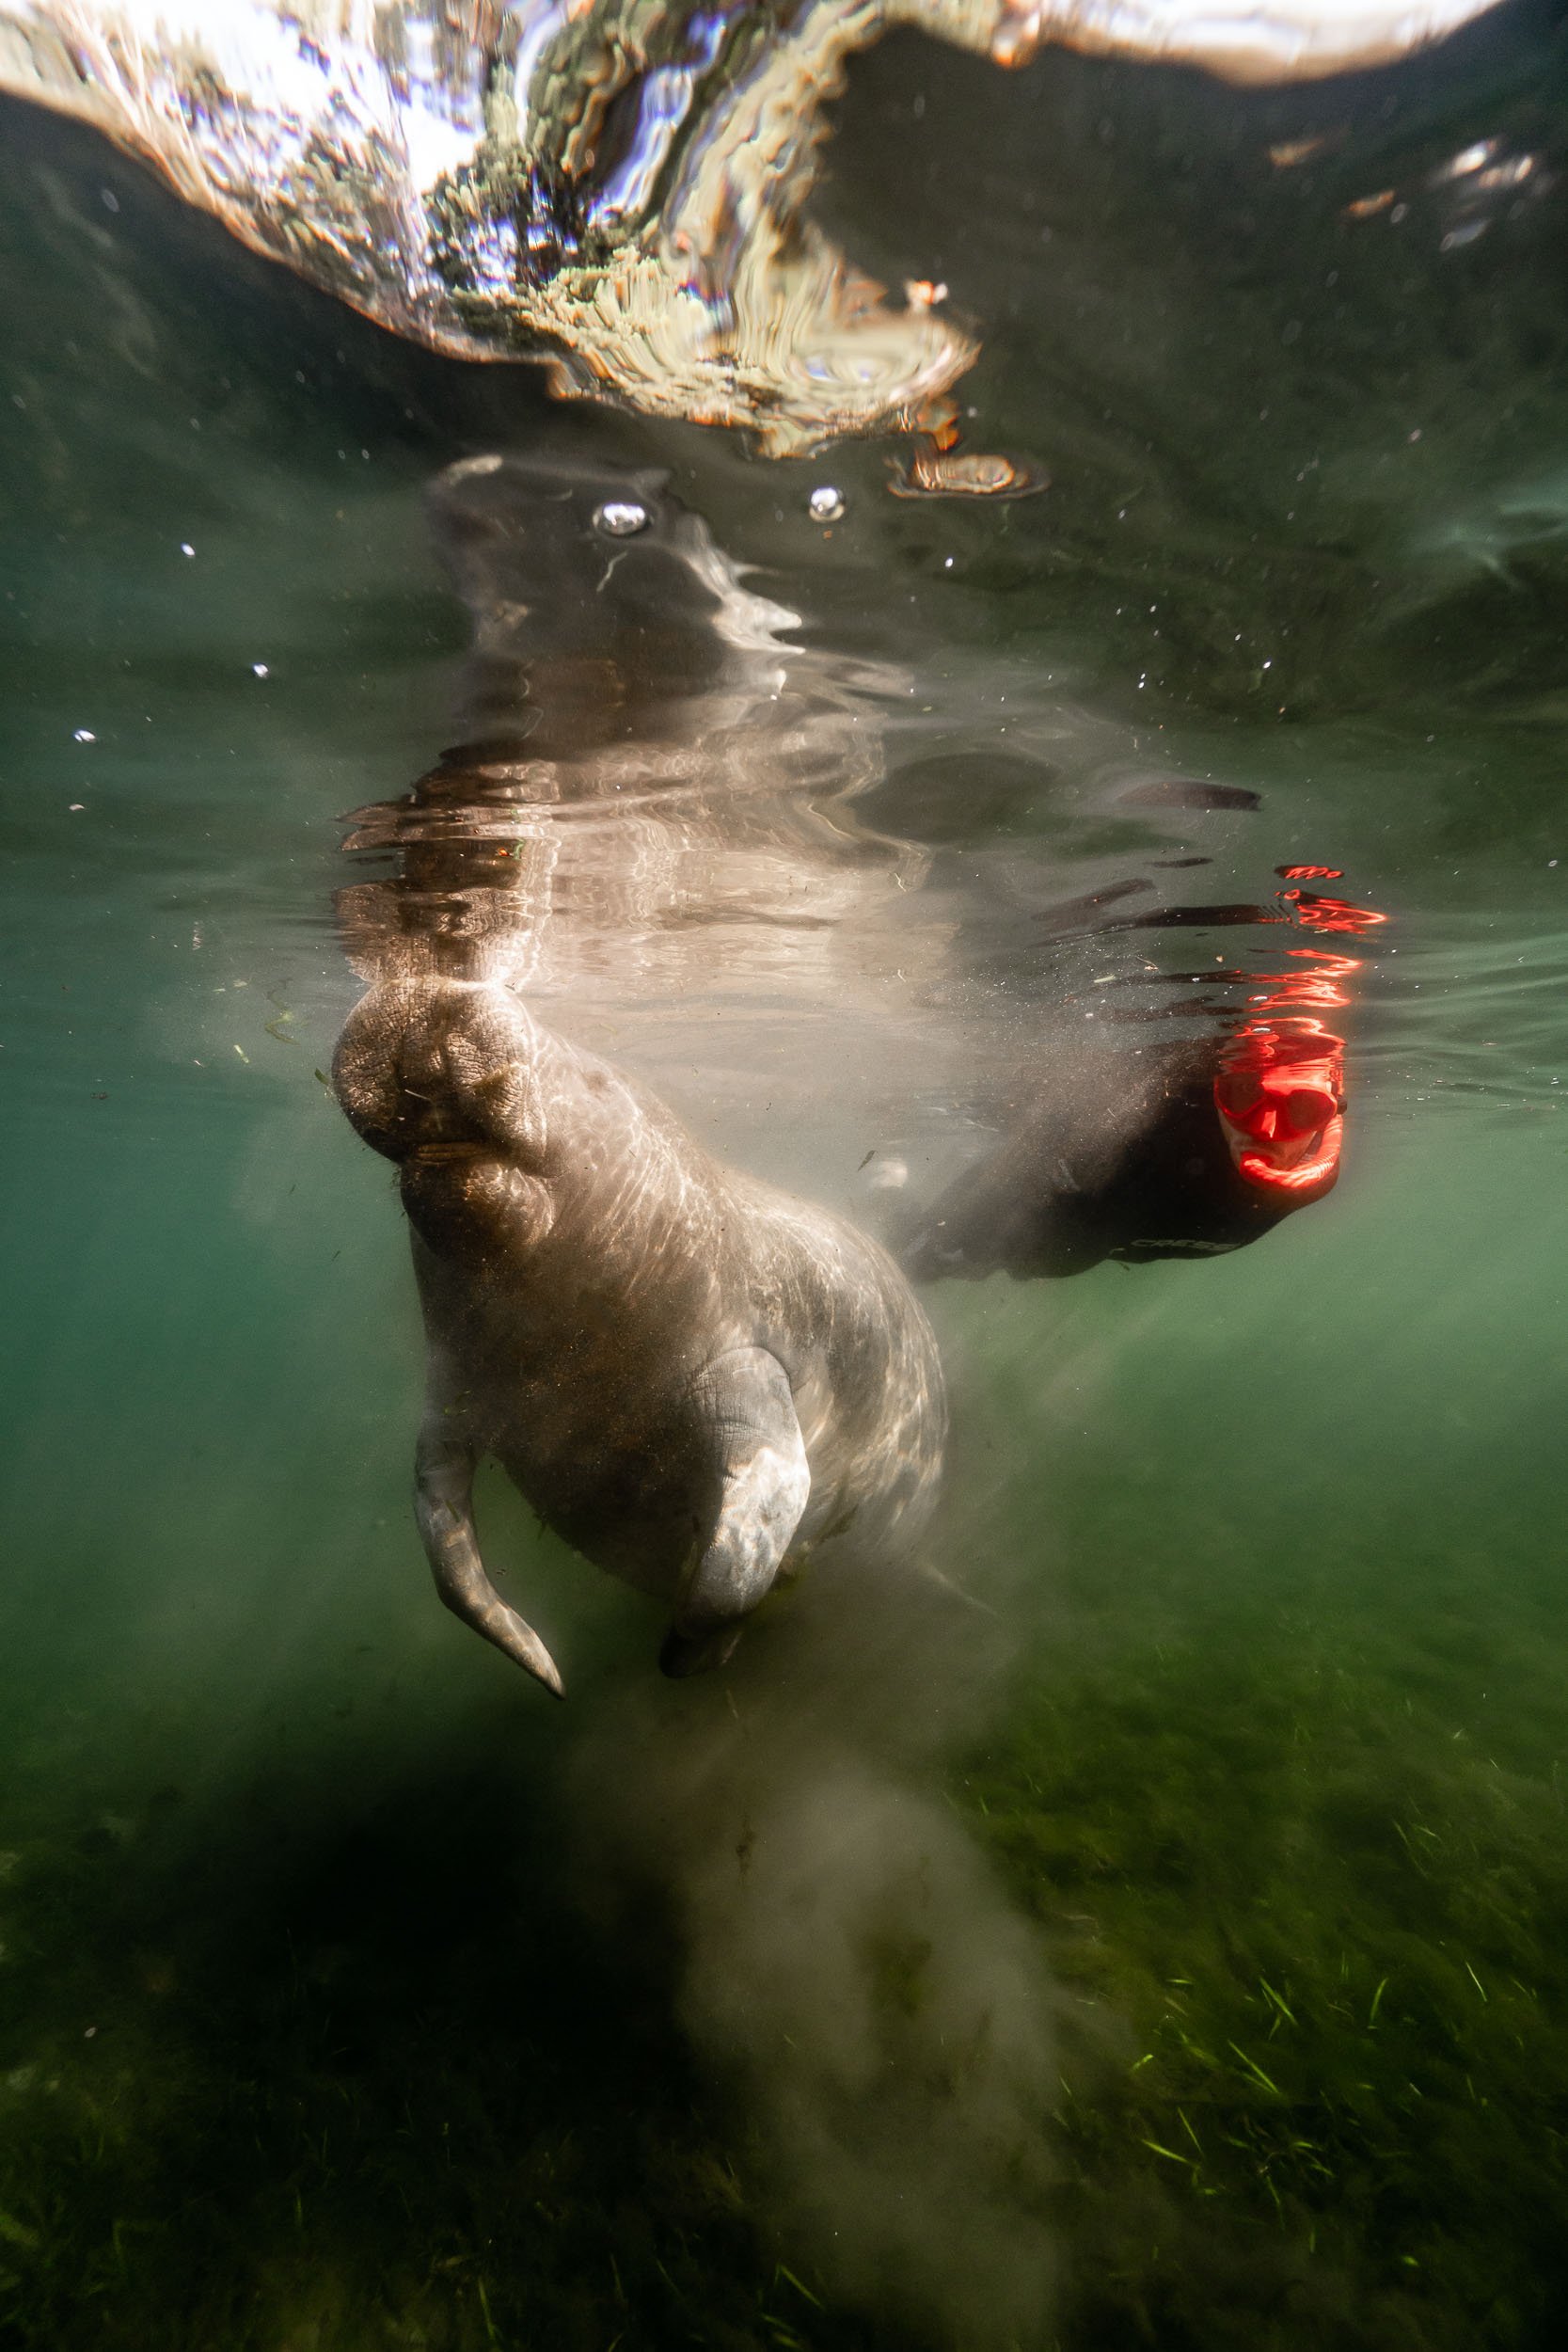 Underwater photo of a manatee and snorkeler